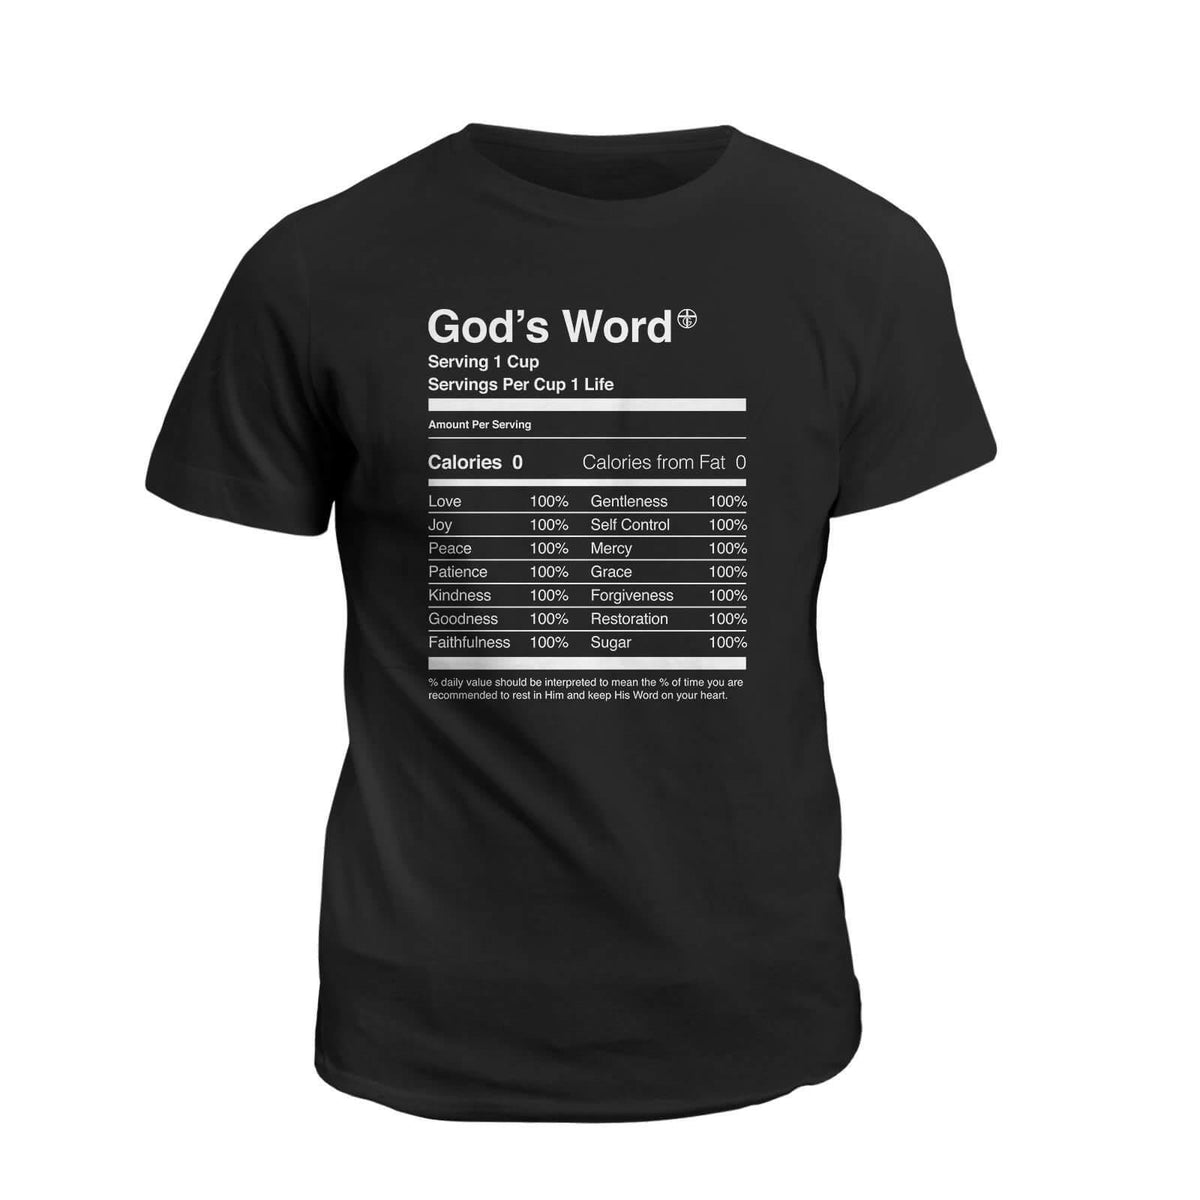 God's Word - Our True God